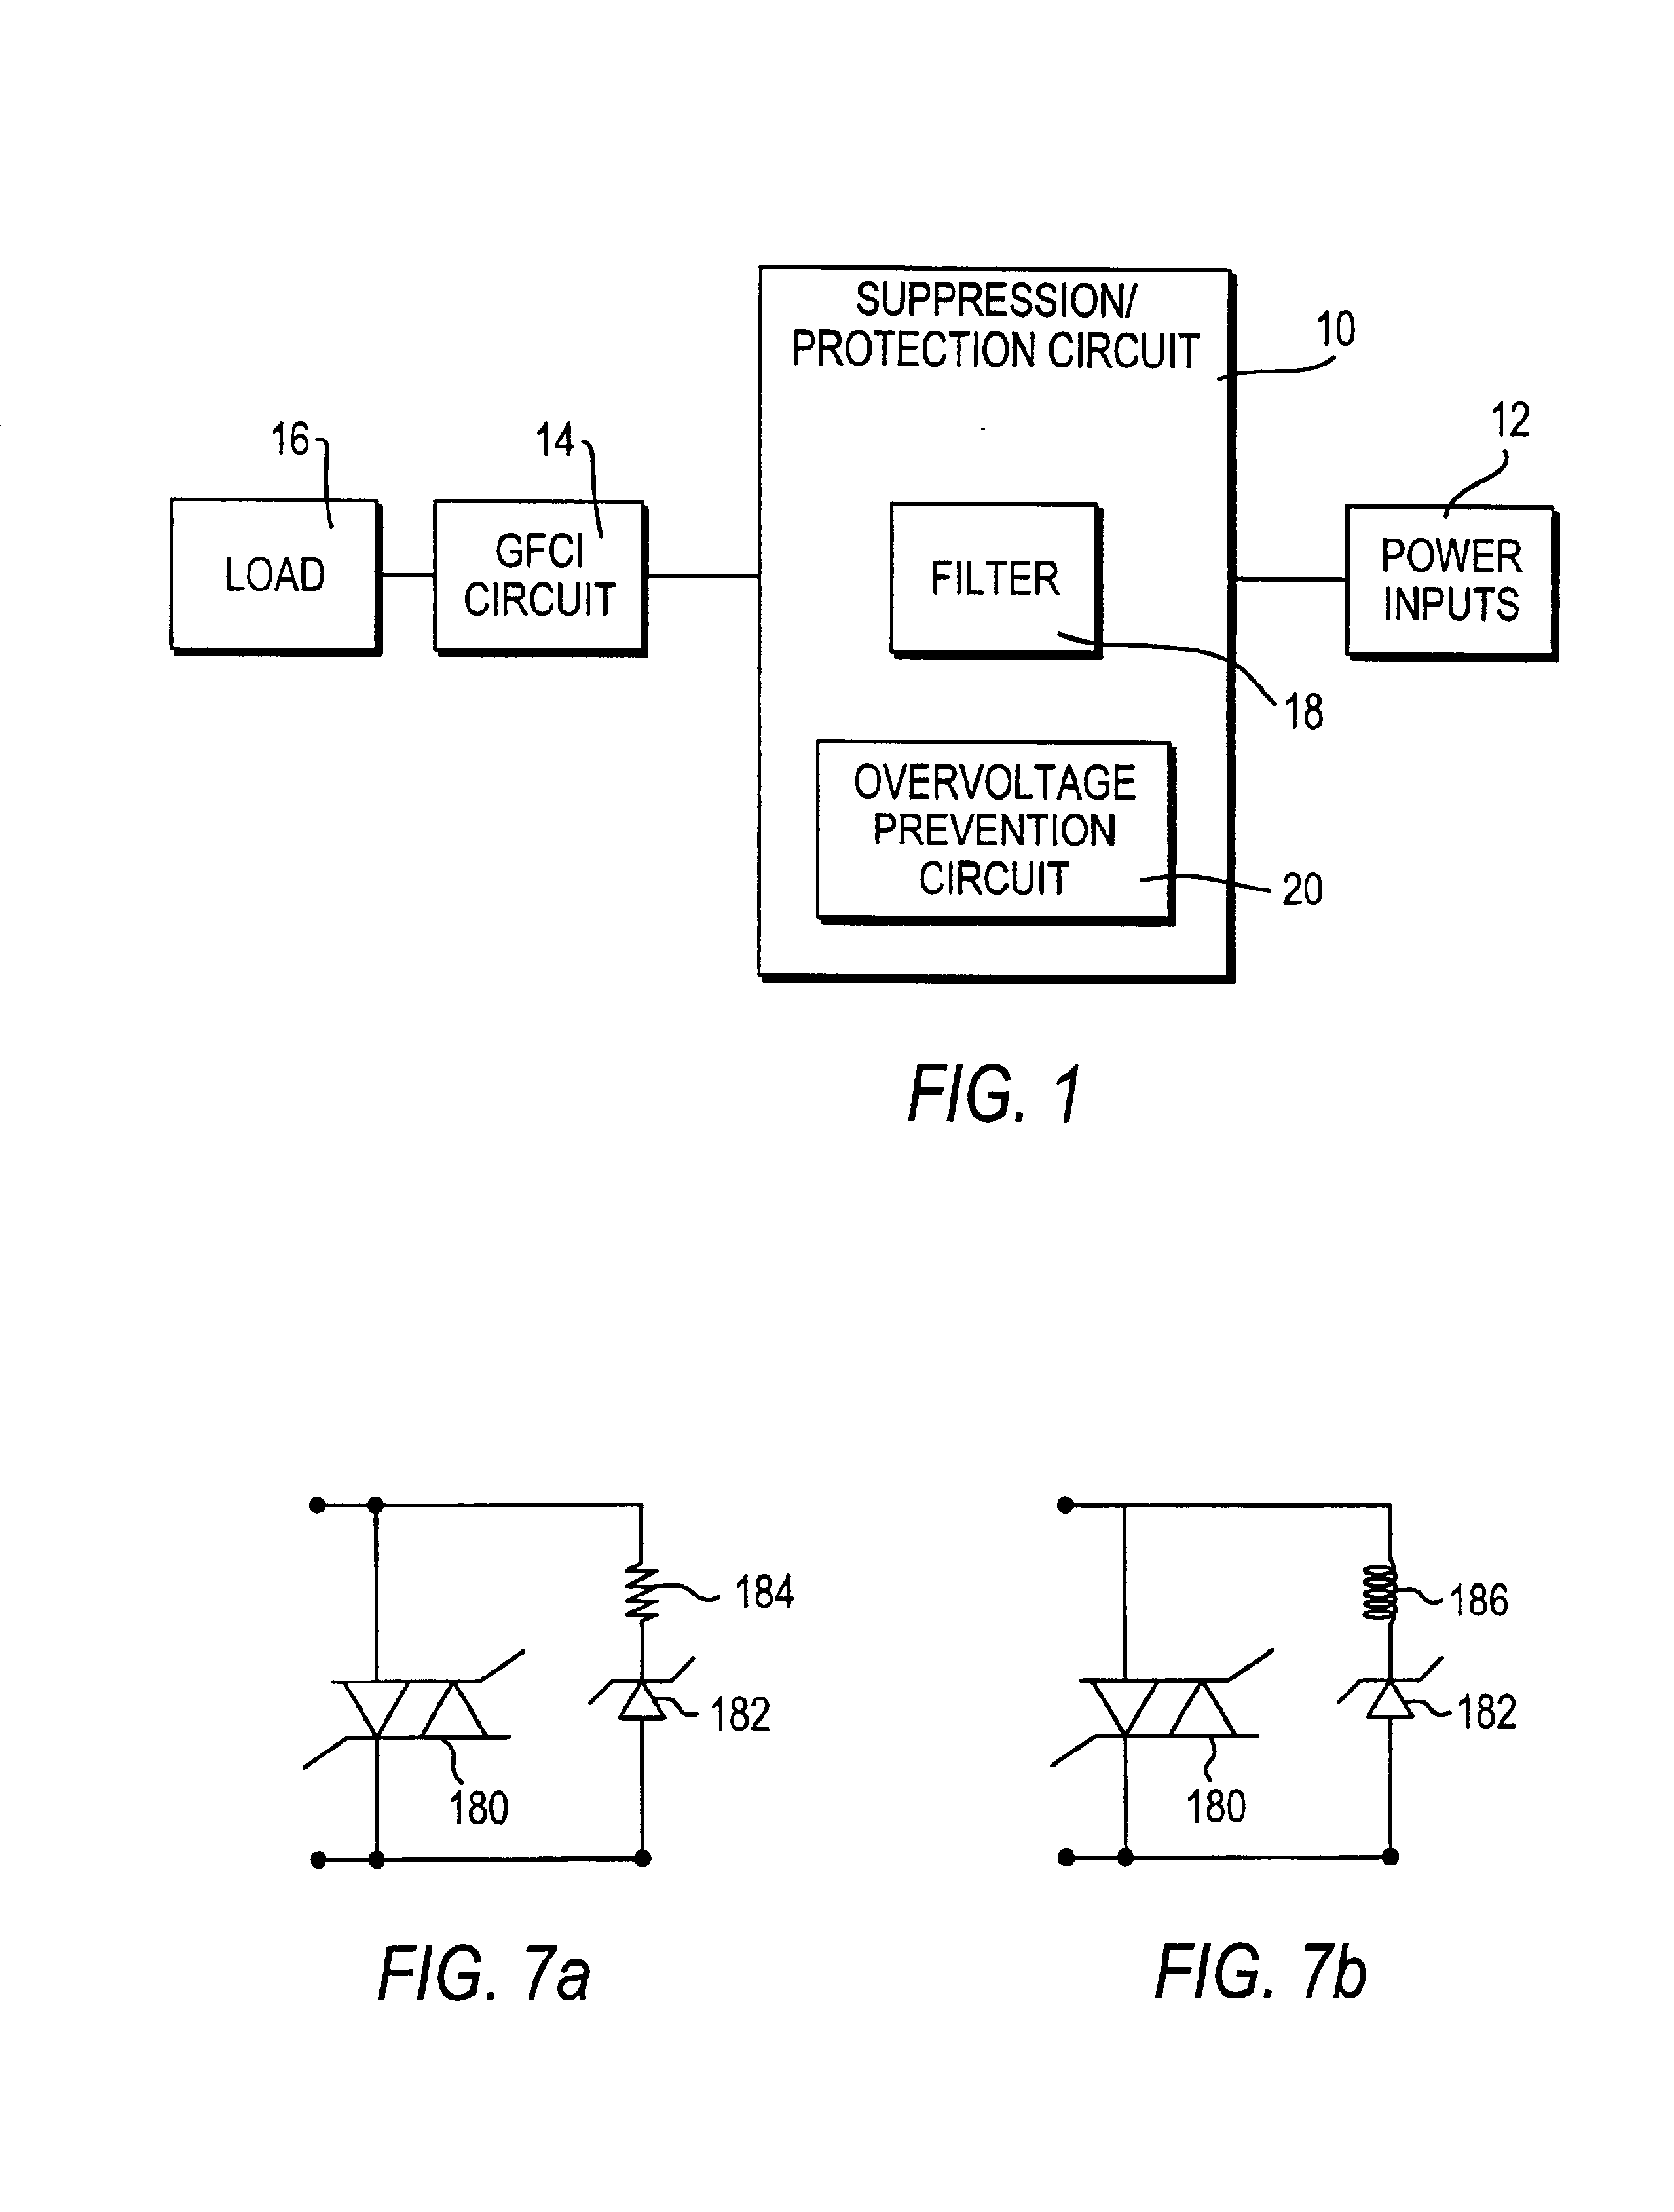 Circuit interrupter with improved surge suppression